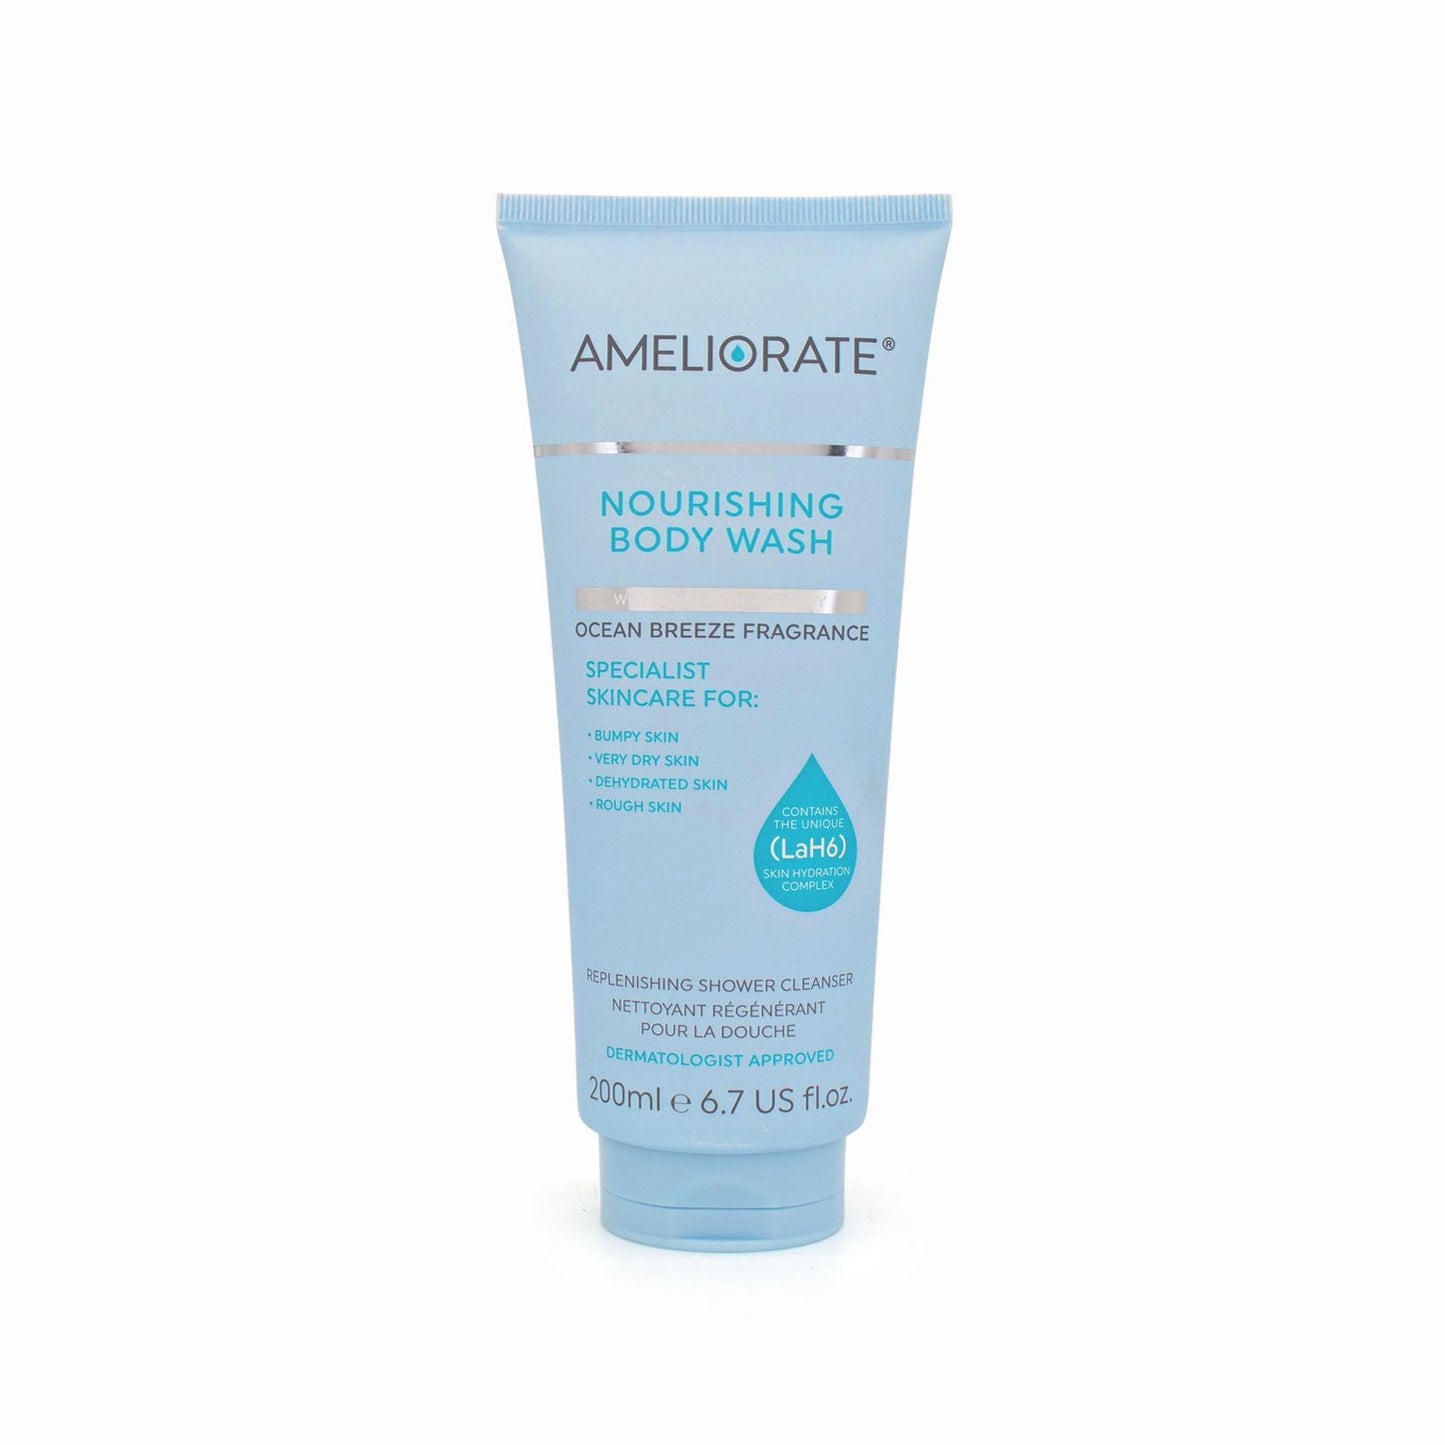 AMELIORATE Nourishing Body Wash Ocean Breeze 200ml - Imperfect Container